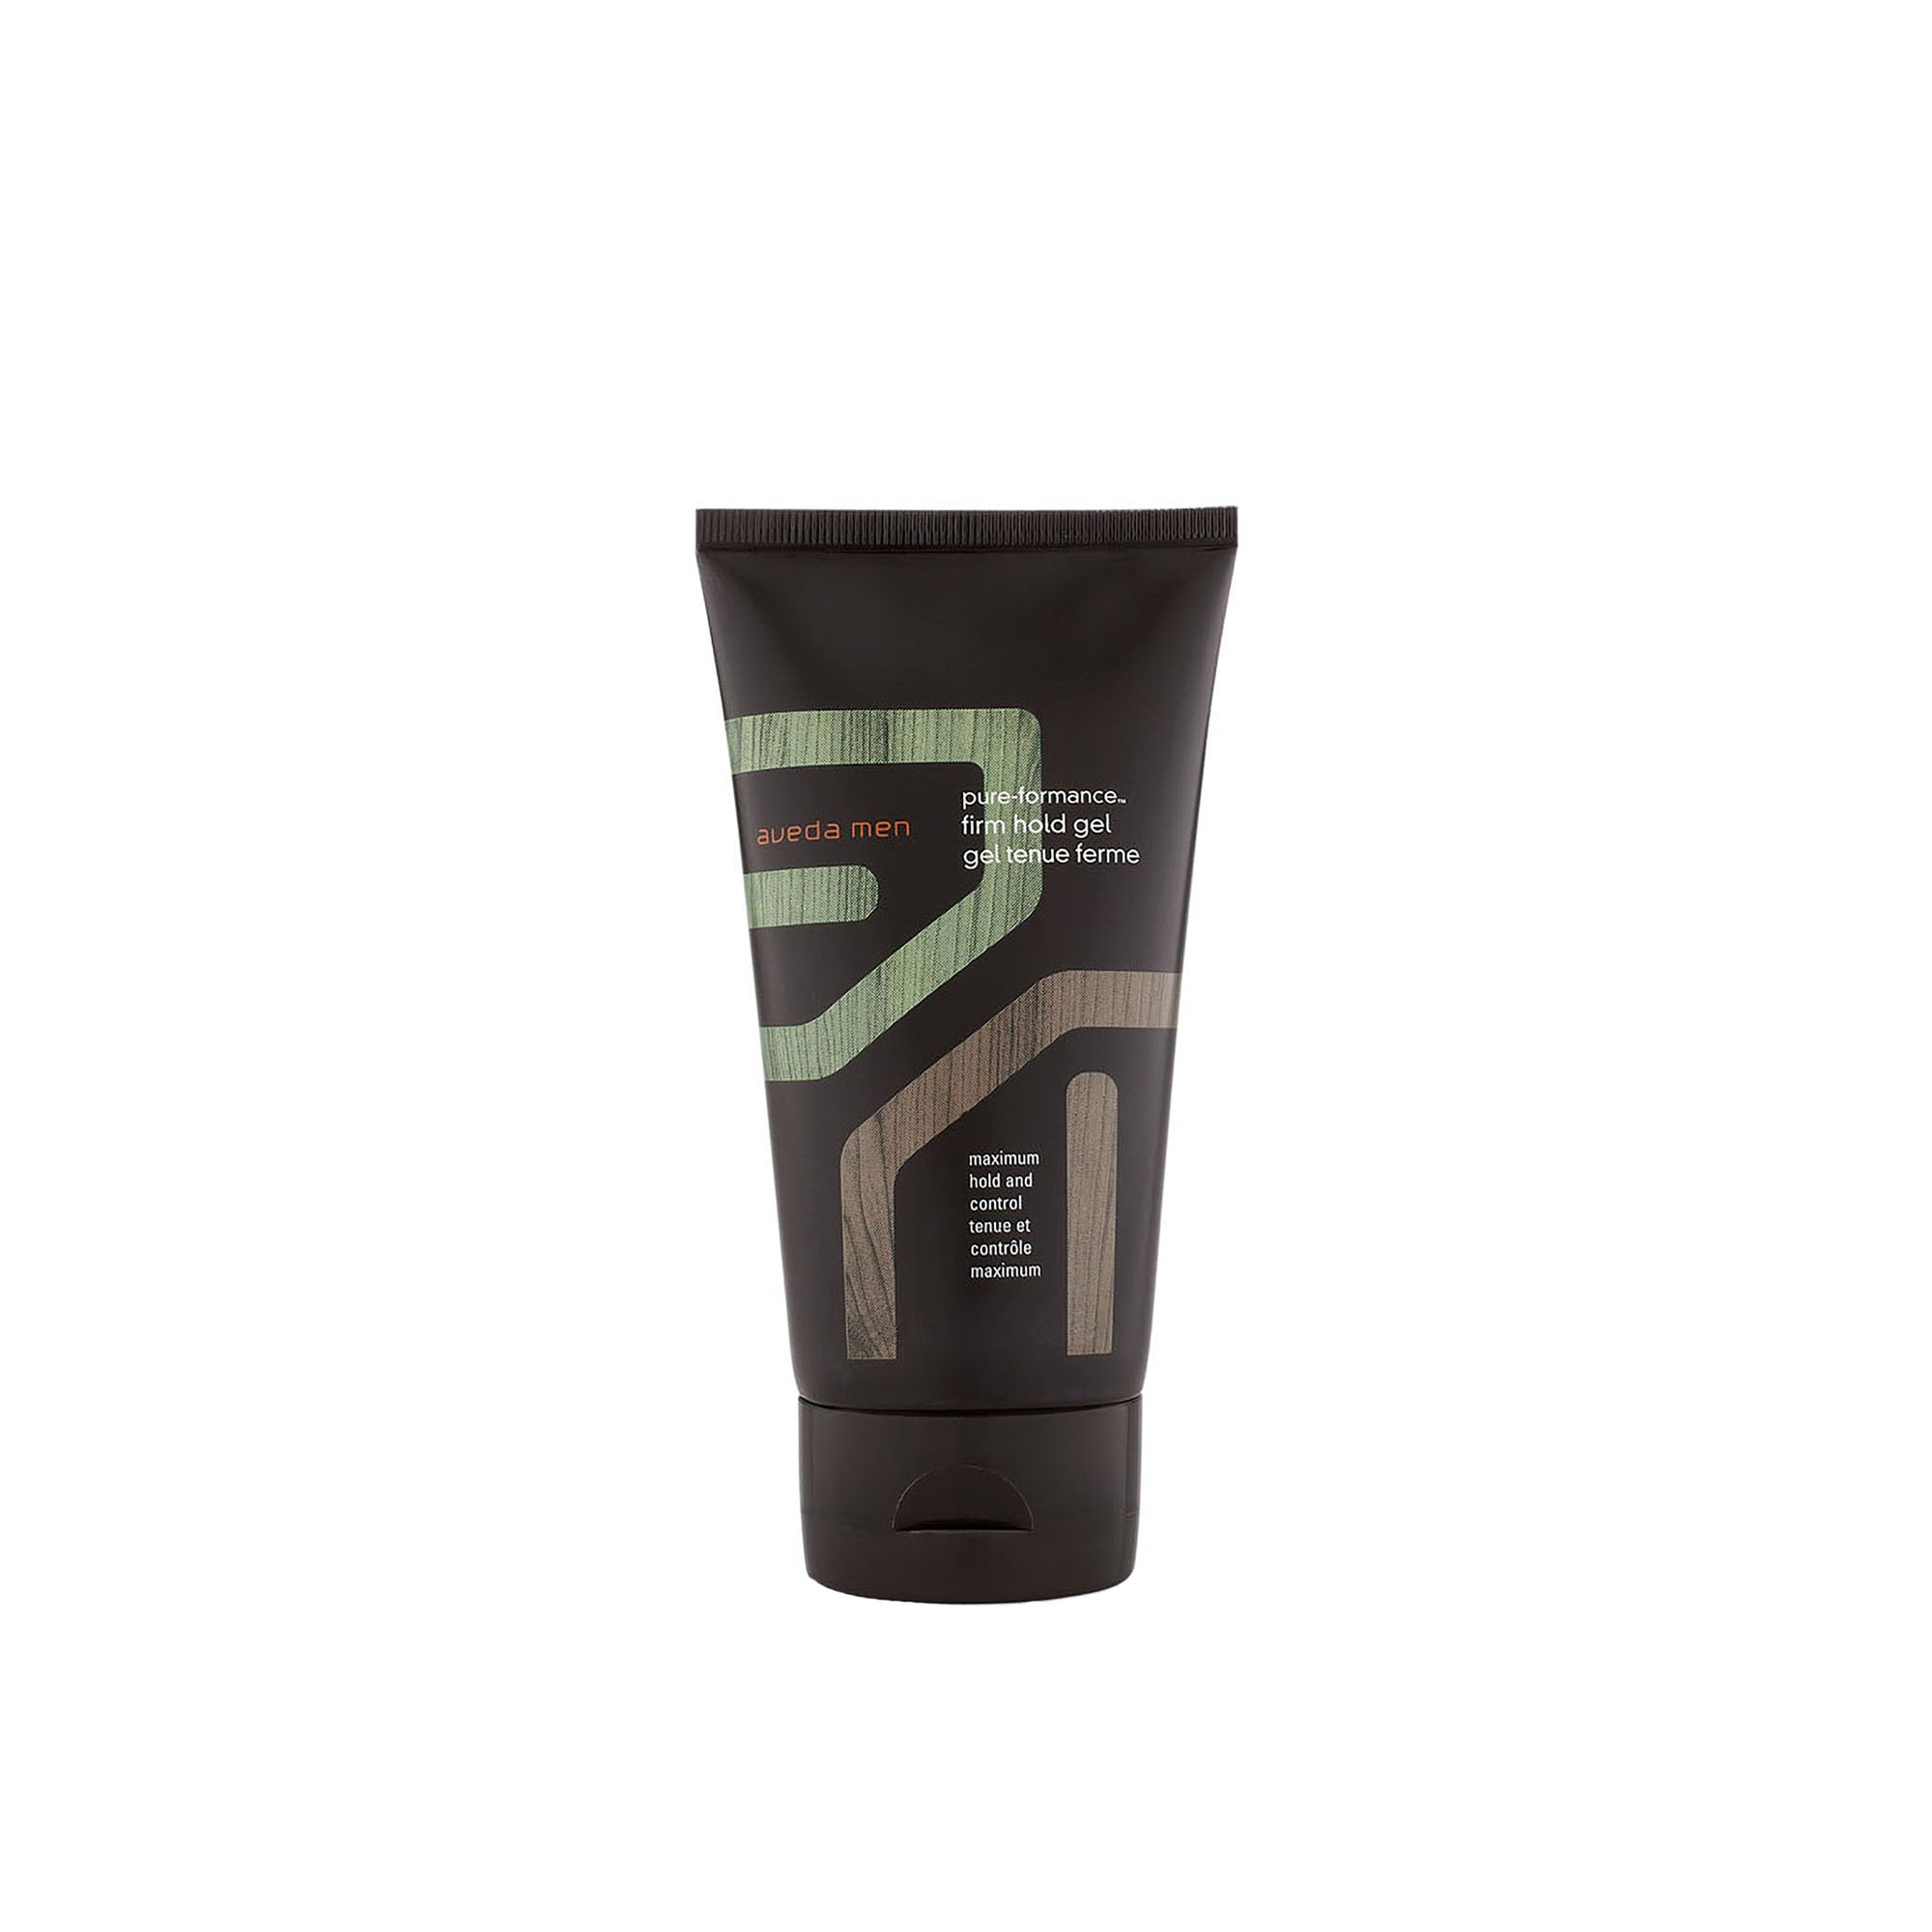 Aveda Men's Pure-Formance Firm Hold Gel